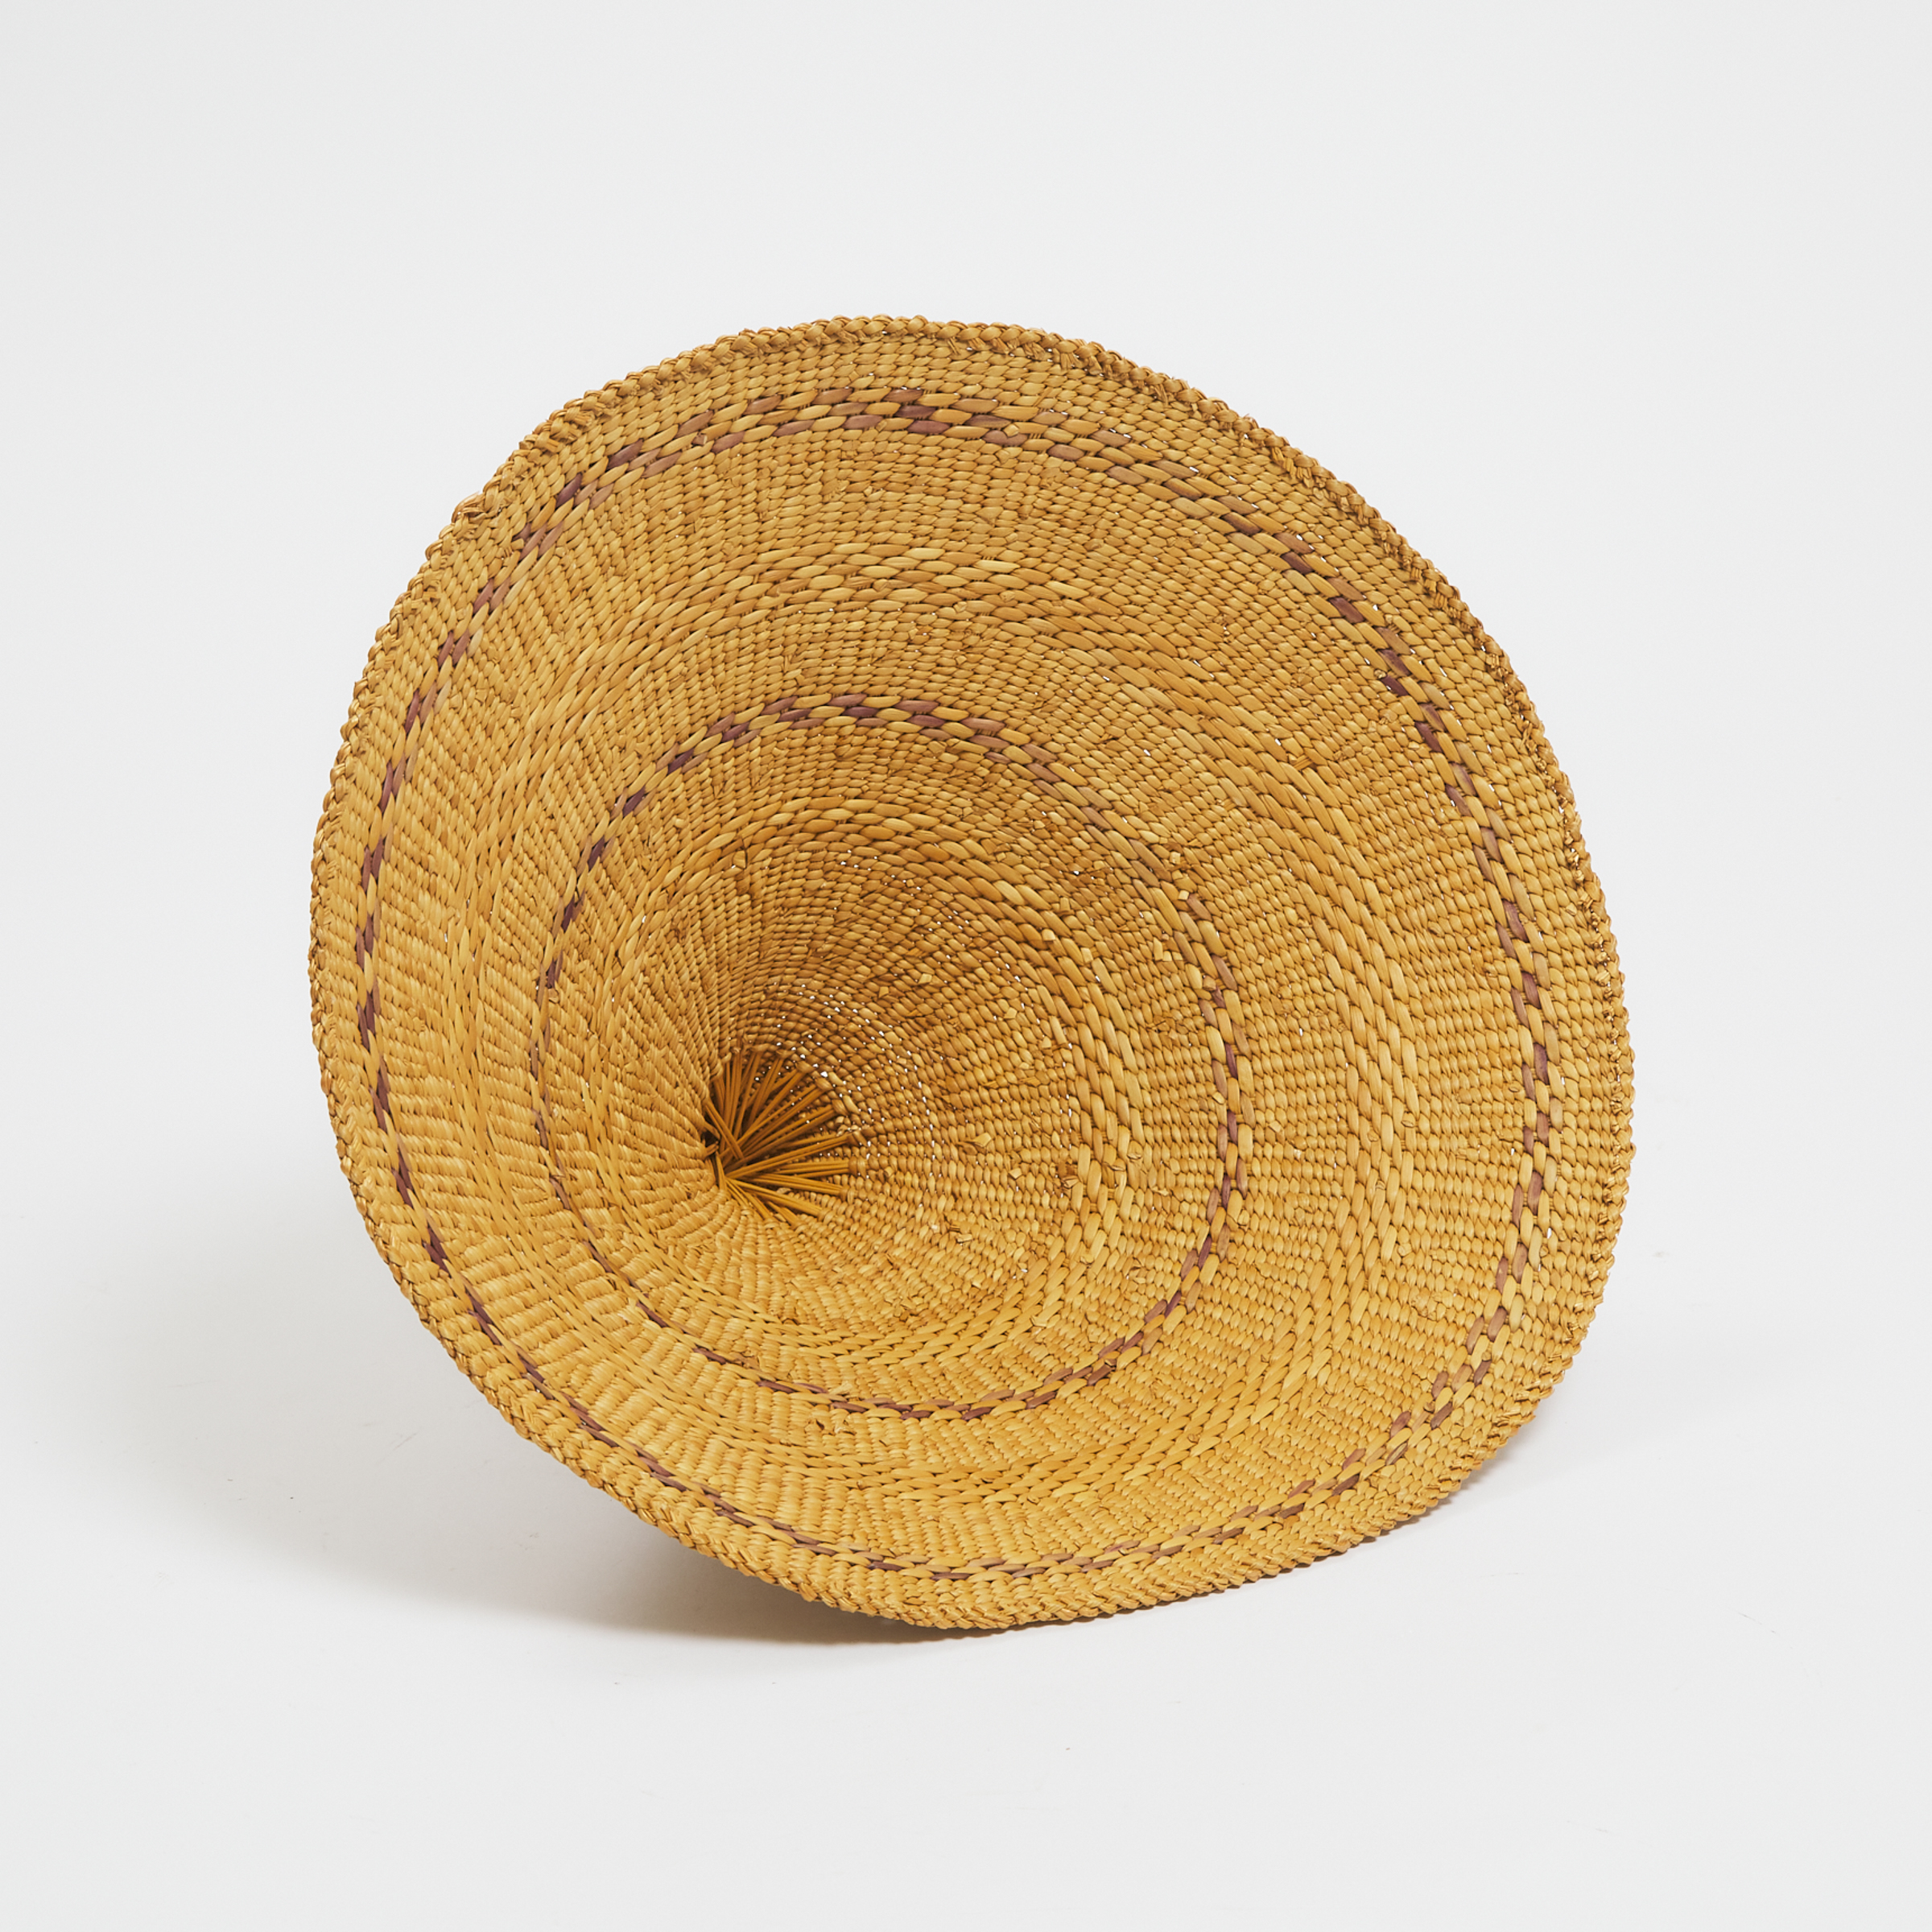 West African Fulani Style Woven Fiber Hat, mid 20th century